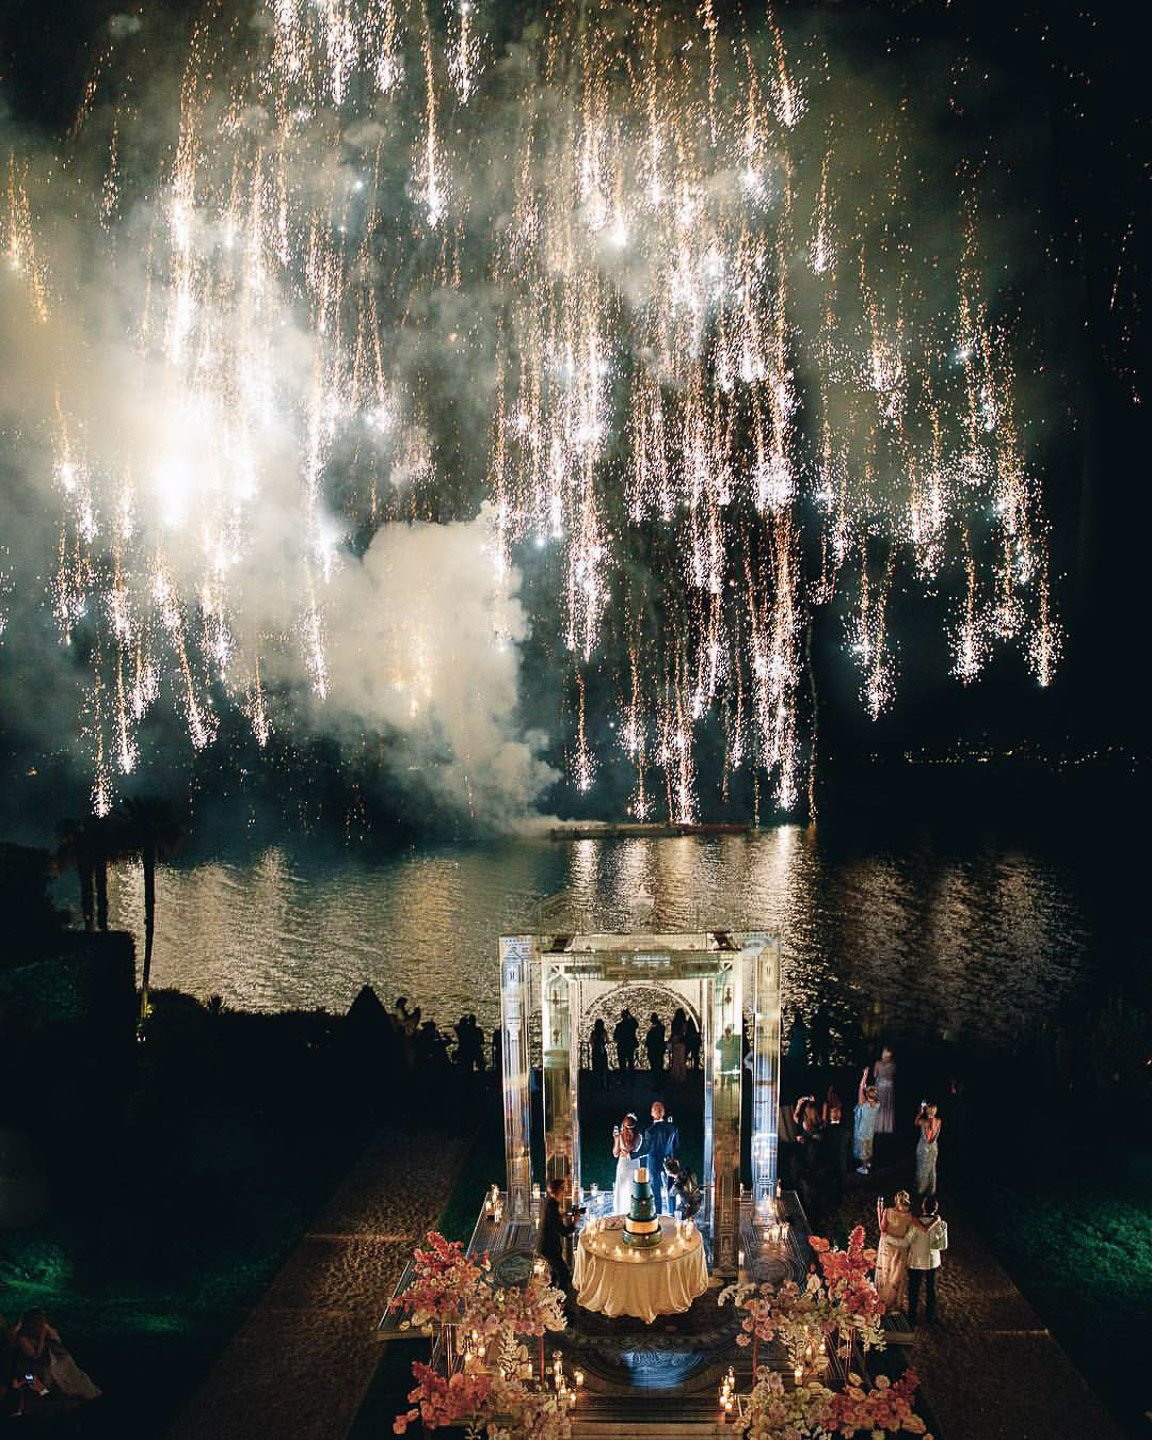 Villa Balbiano luxury property Lake Como Italy exclusive private rental rental unique intimate weddings event venue ceremony stunning best water view fireworks happy bride groom